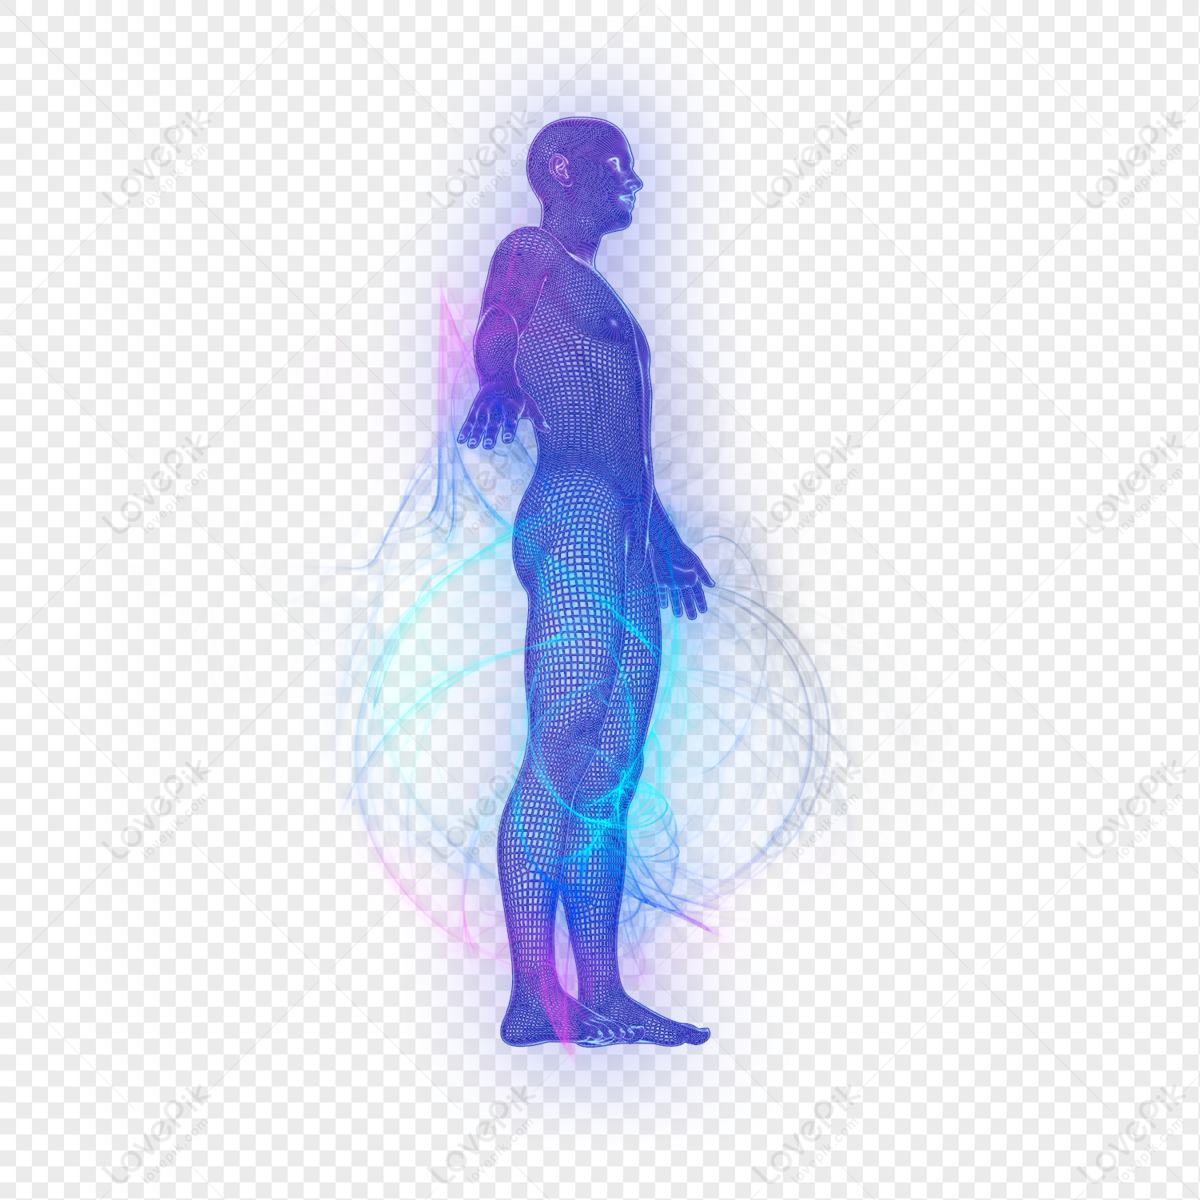 Intelligent Human Body PNG Transparent Images Free Download, Vector Files